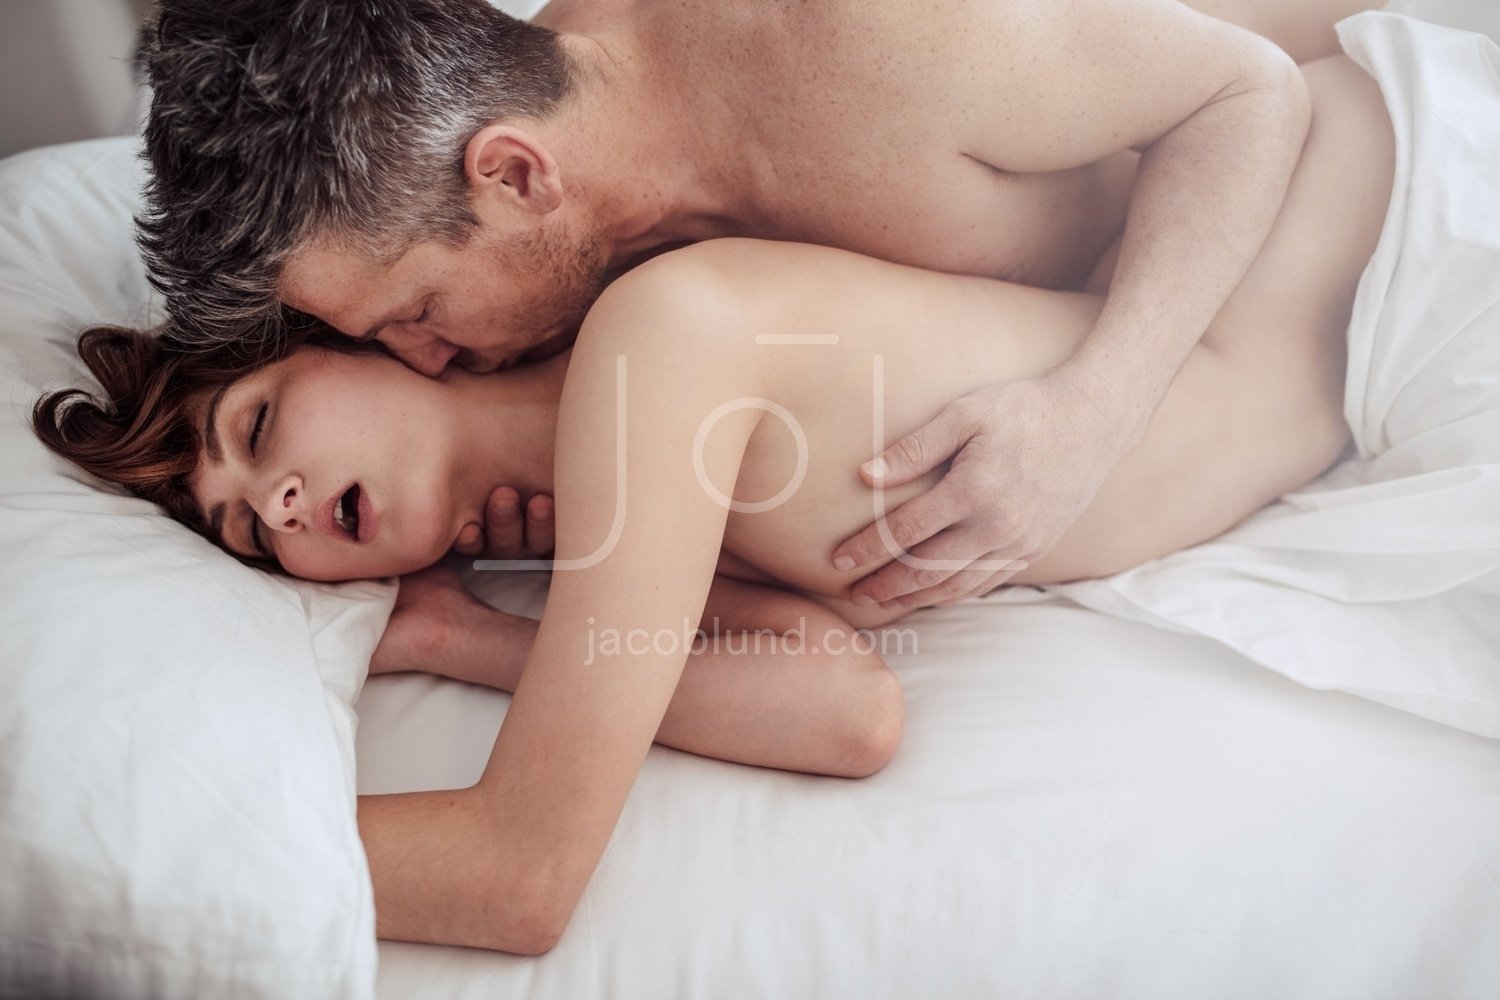 Man and woman in bed having intimate Porn Photo